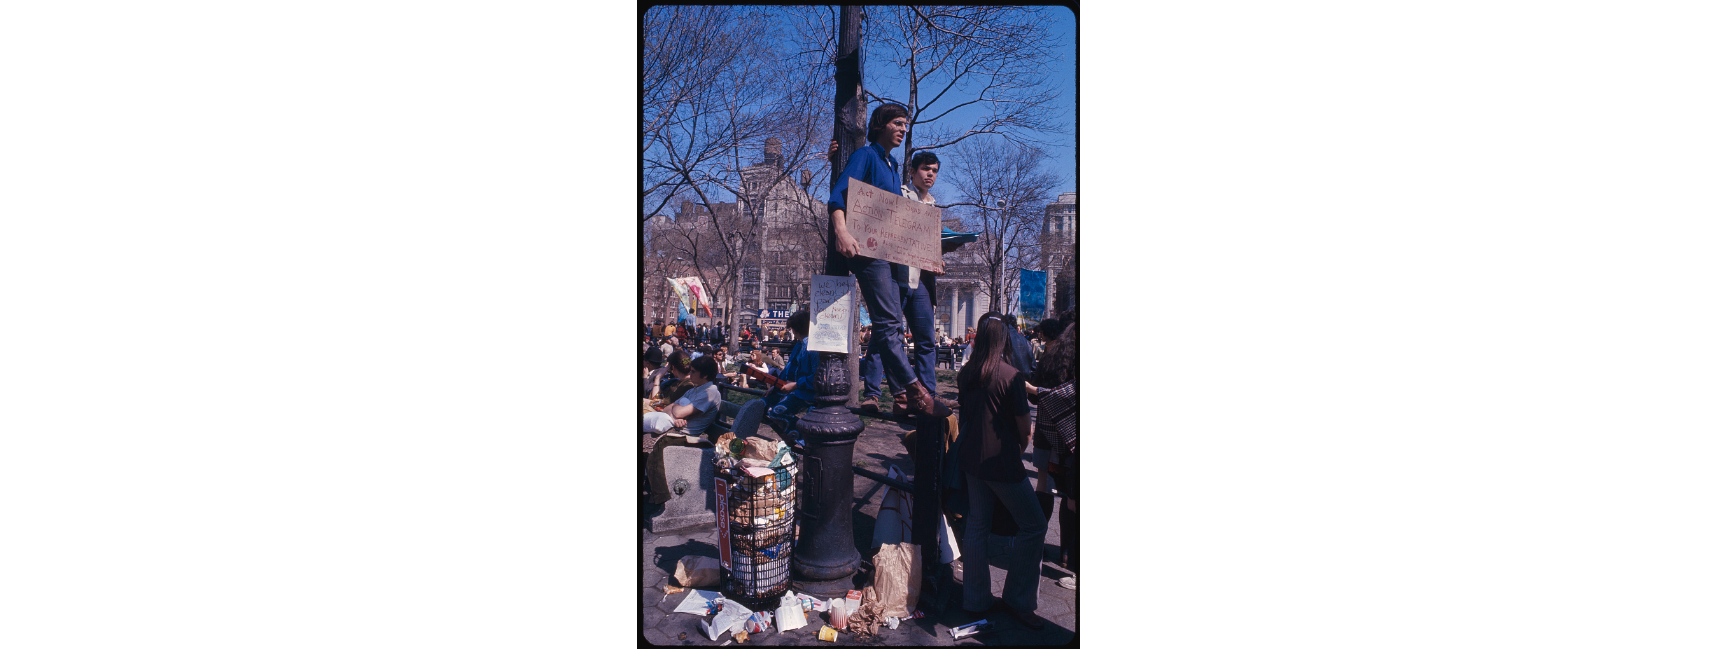 photograph of protestors with sign near overflowing trash